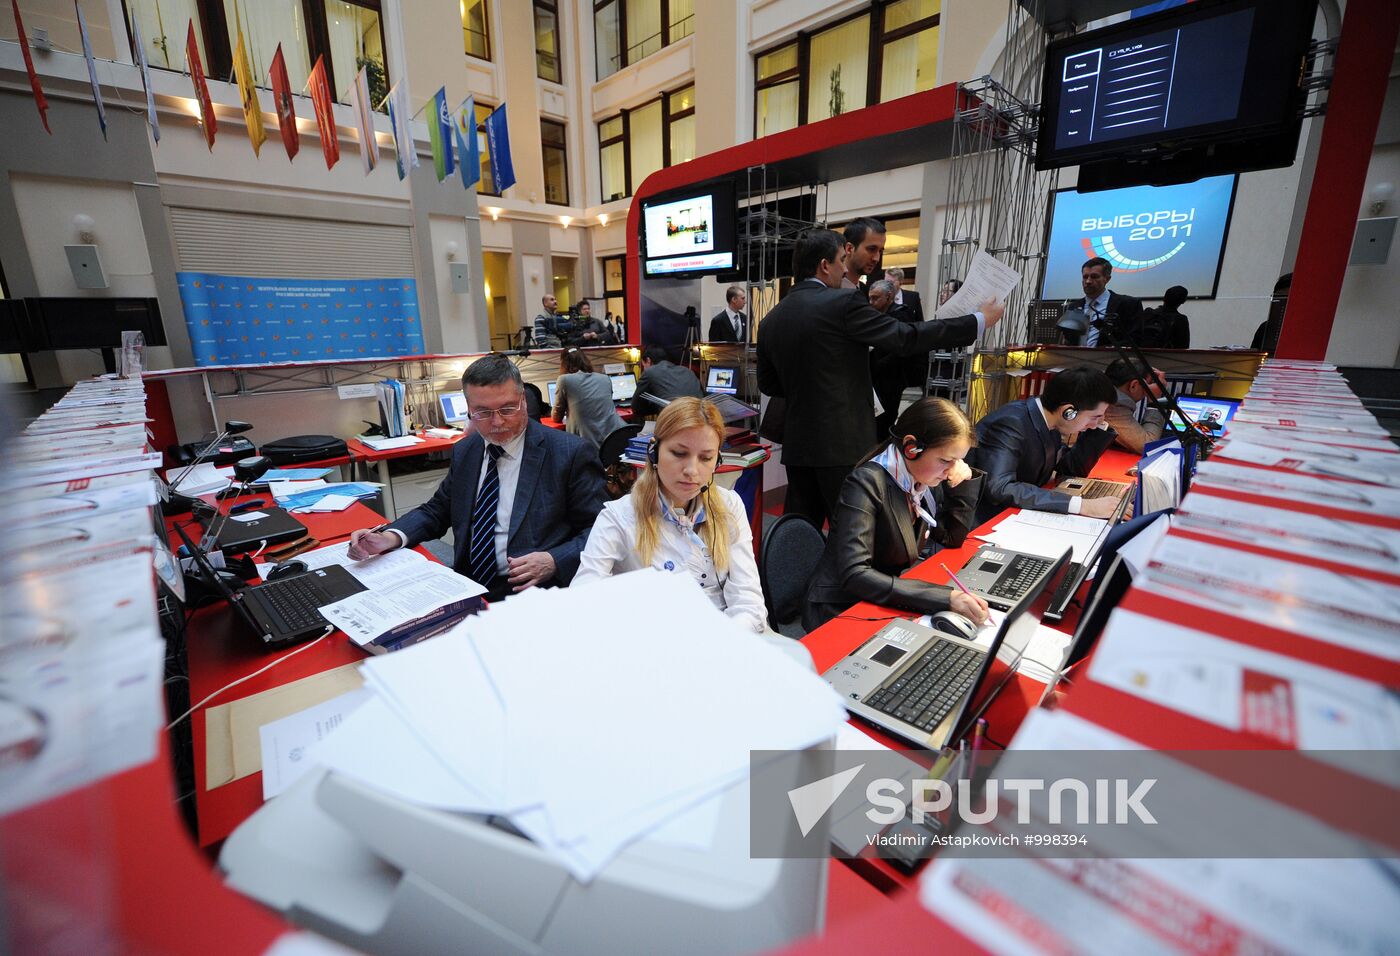 Observers monitor CEC operations during Russia's 2011 elections